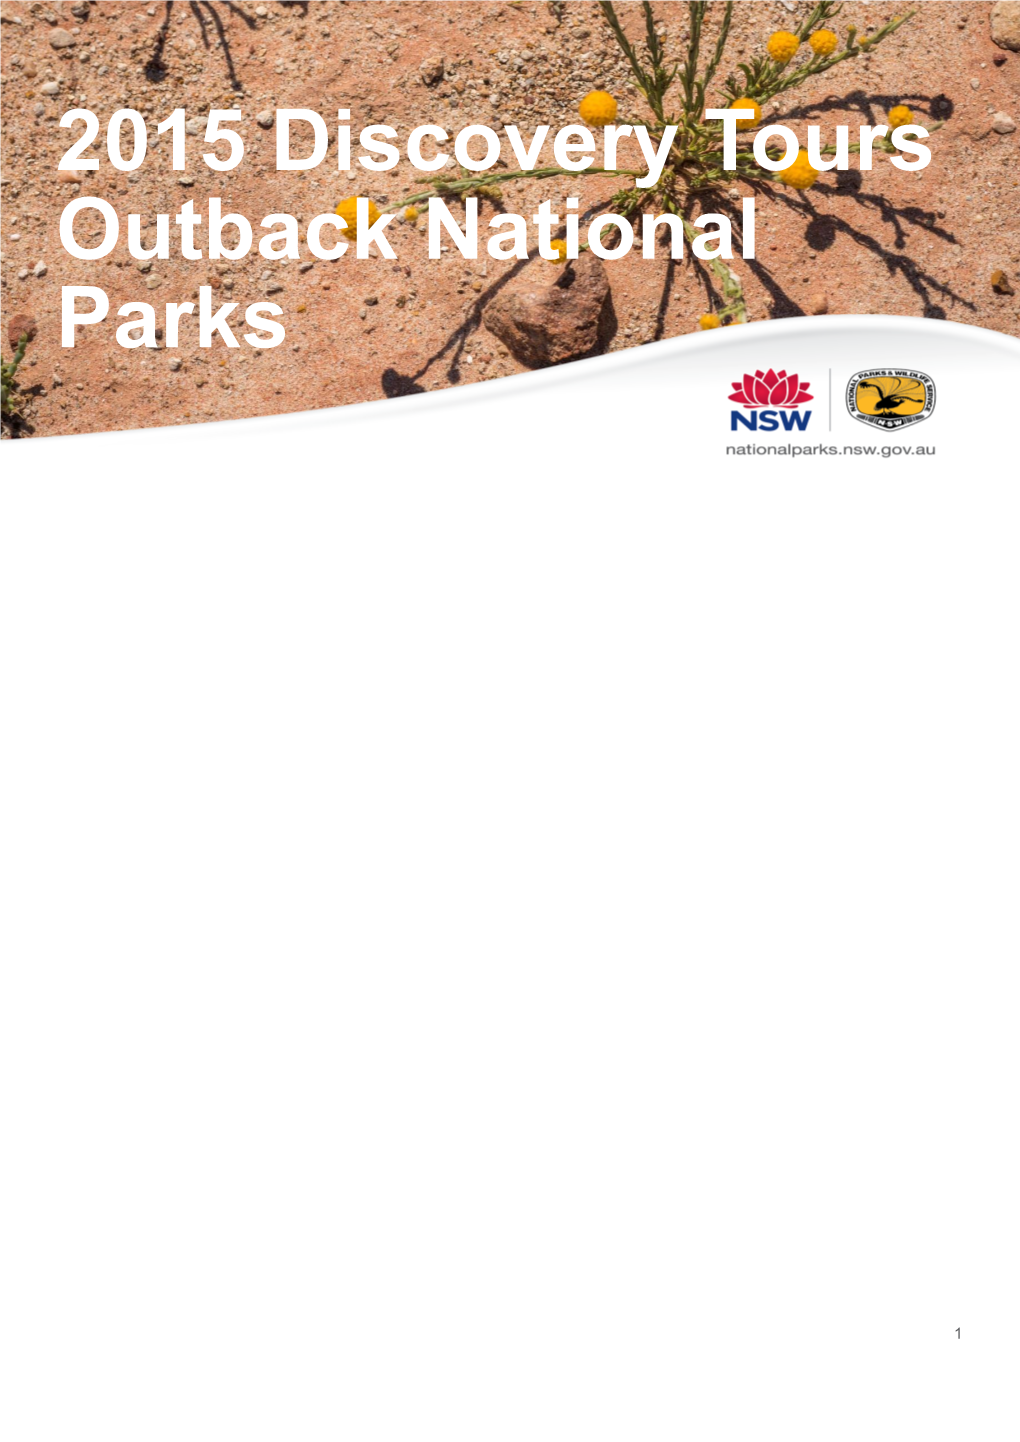 2015 Discovery Tours Outback National Parks